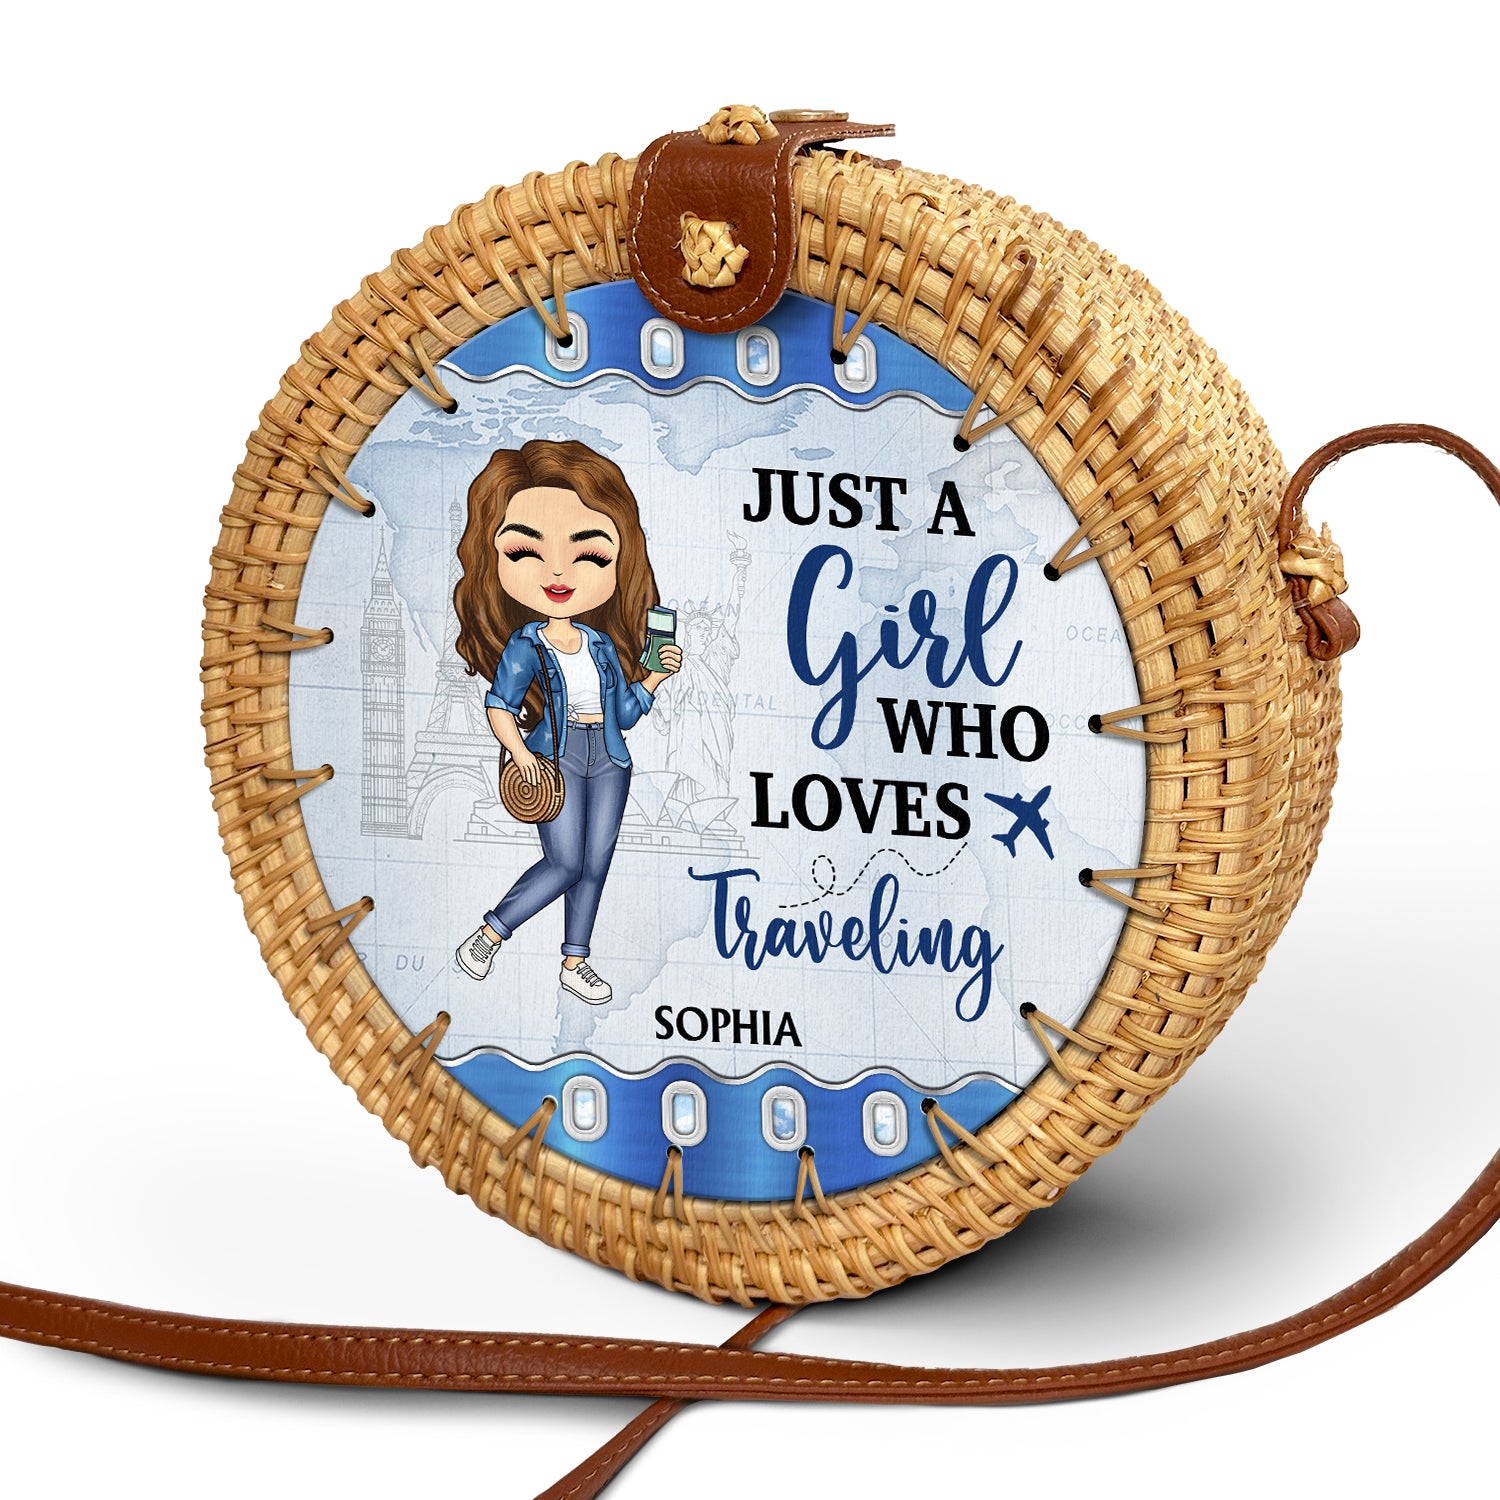 Just A Girl Who Loves Beach Traveling Cruising - Gift For Travel Lovers - Personalized Custom Round Rattan Bag